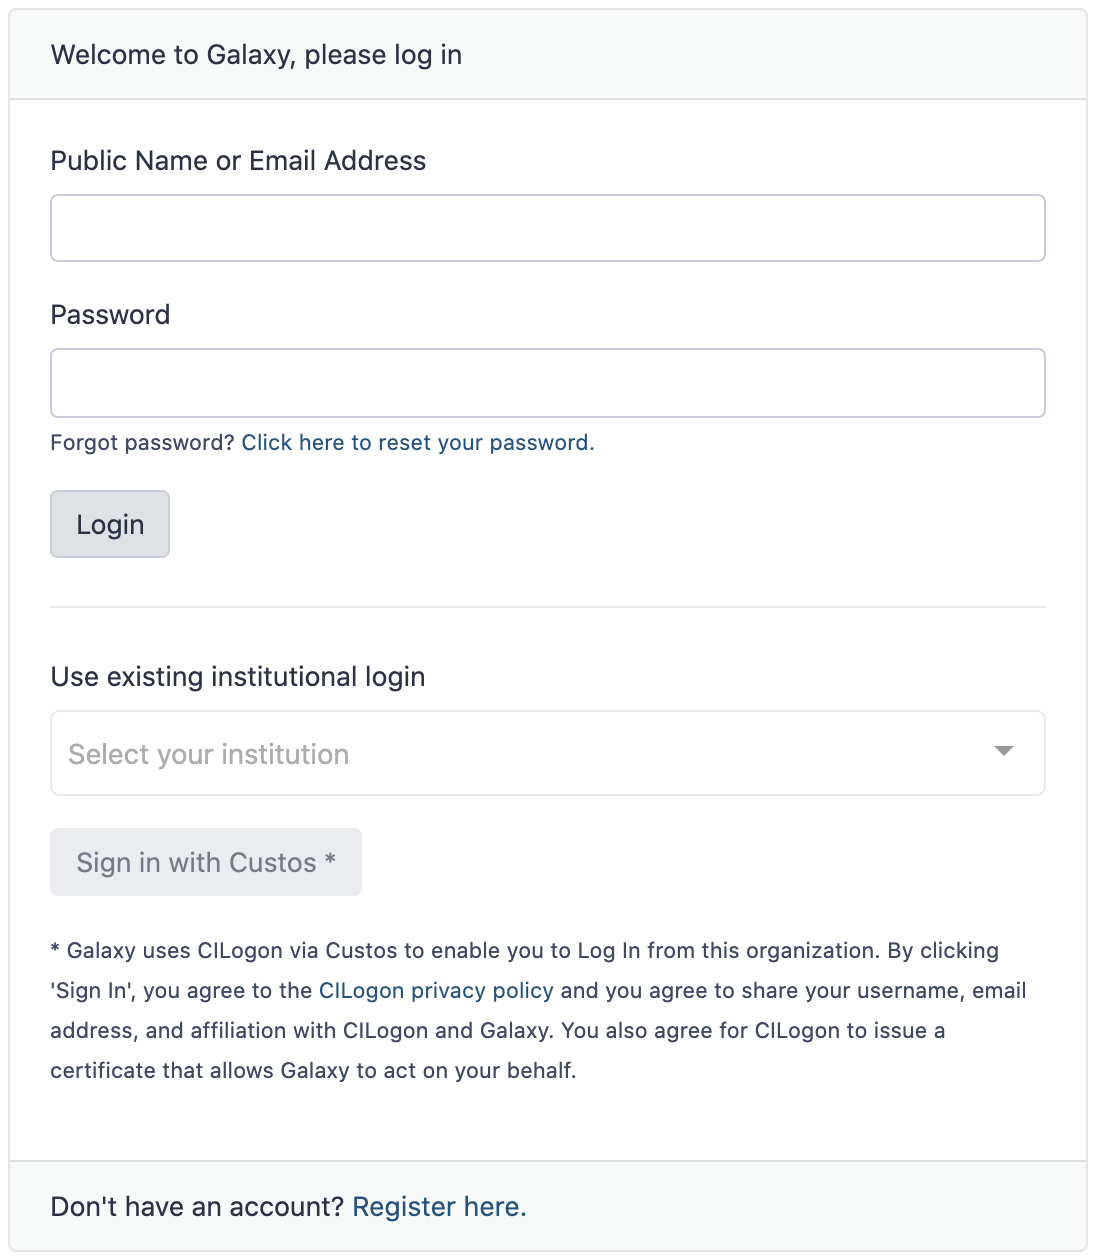 User login with Custos enabled